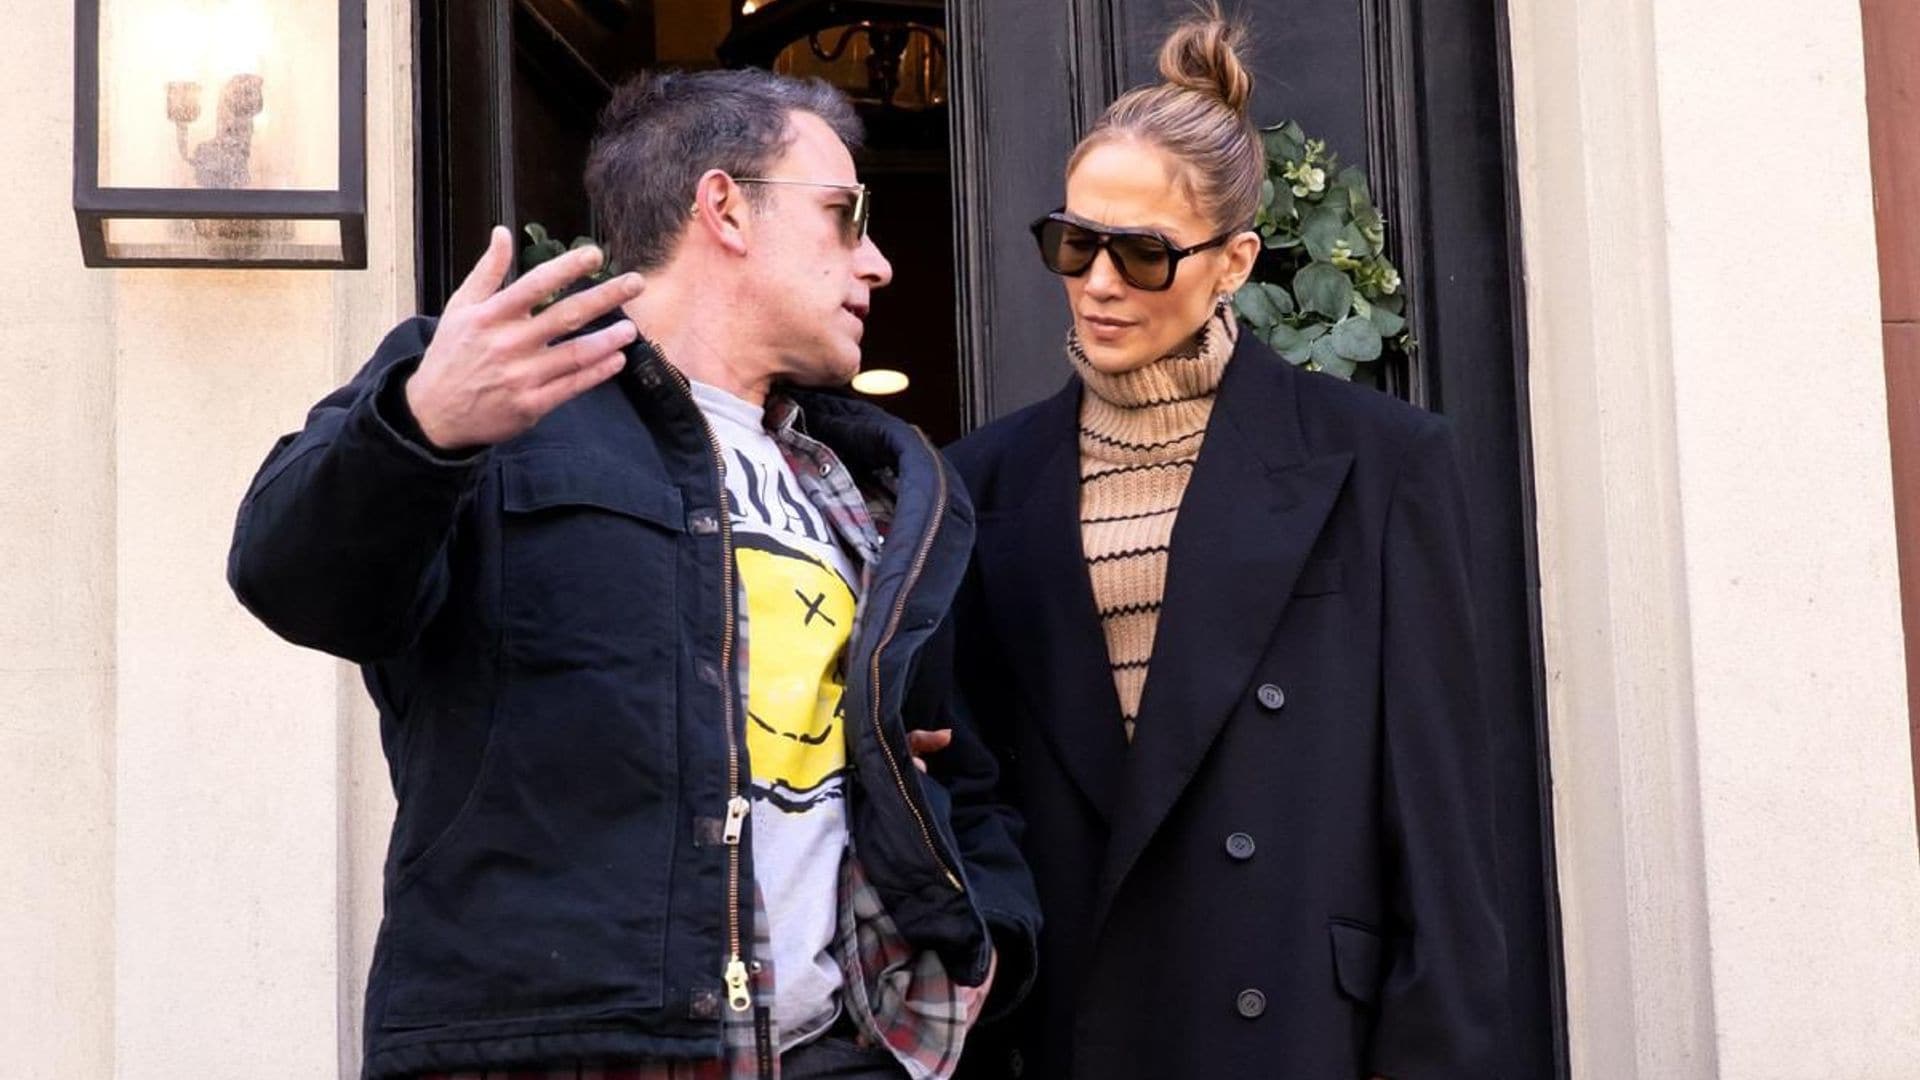 Jennifer Lopez and Ben Affleck’s divorce rumors: The mystery surrounding their relationship